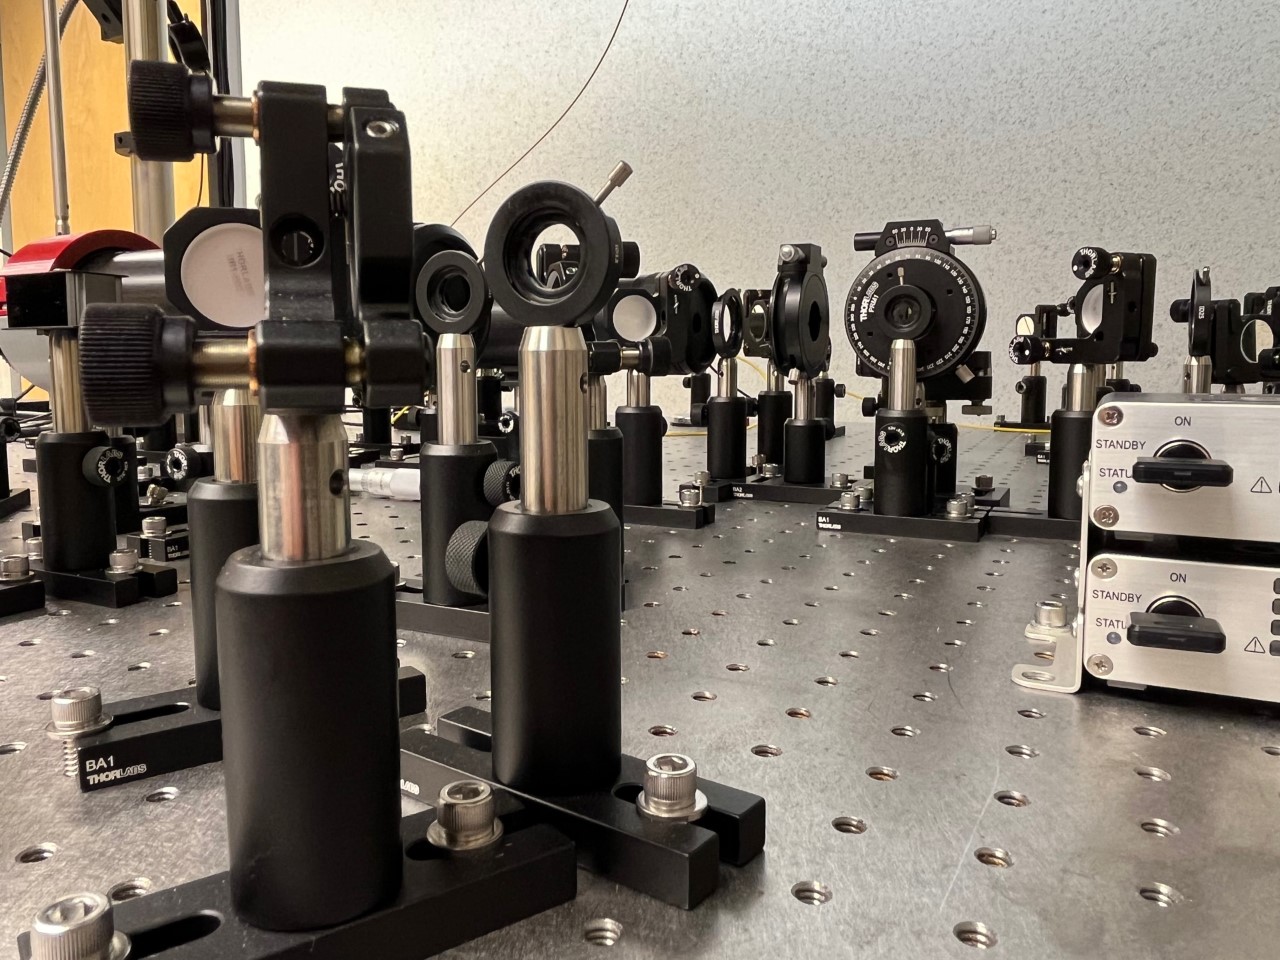 Laser and optical components on an optical table